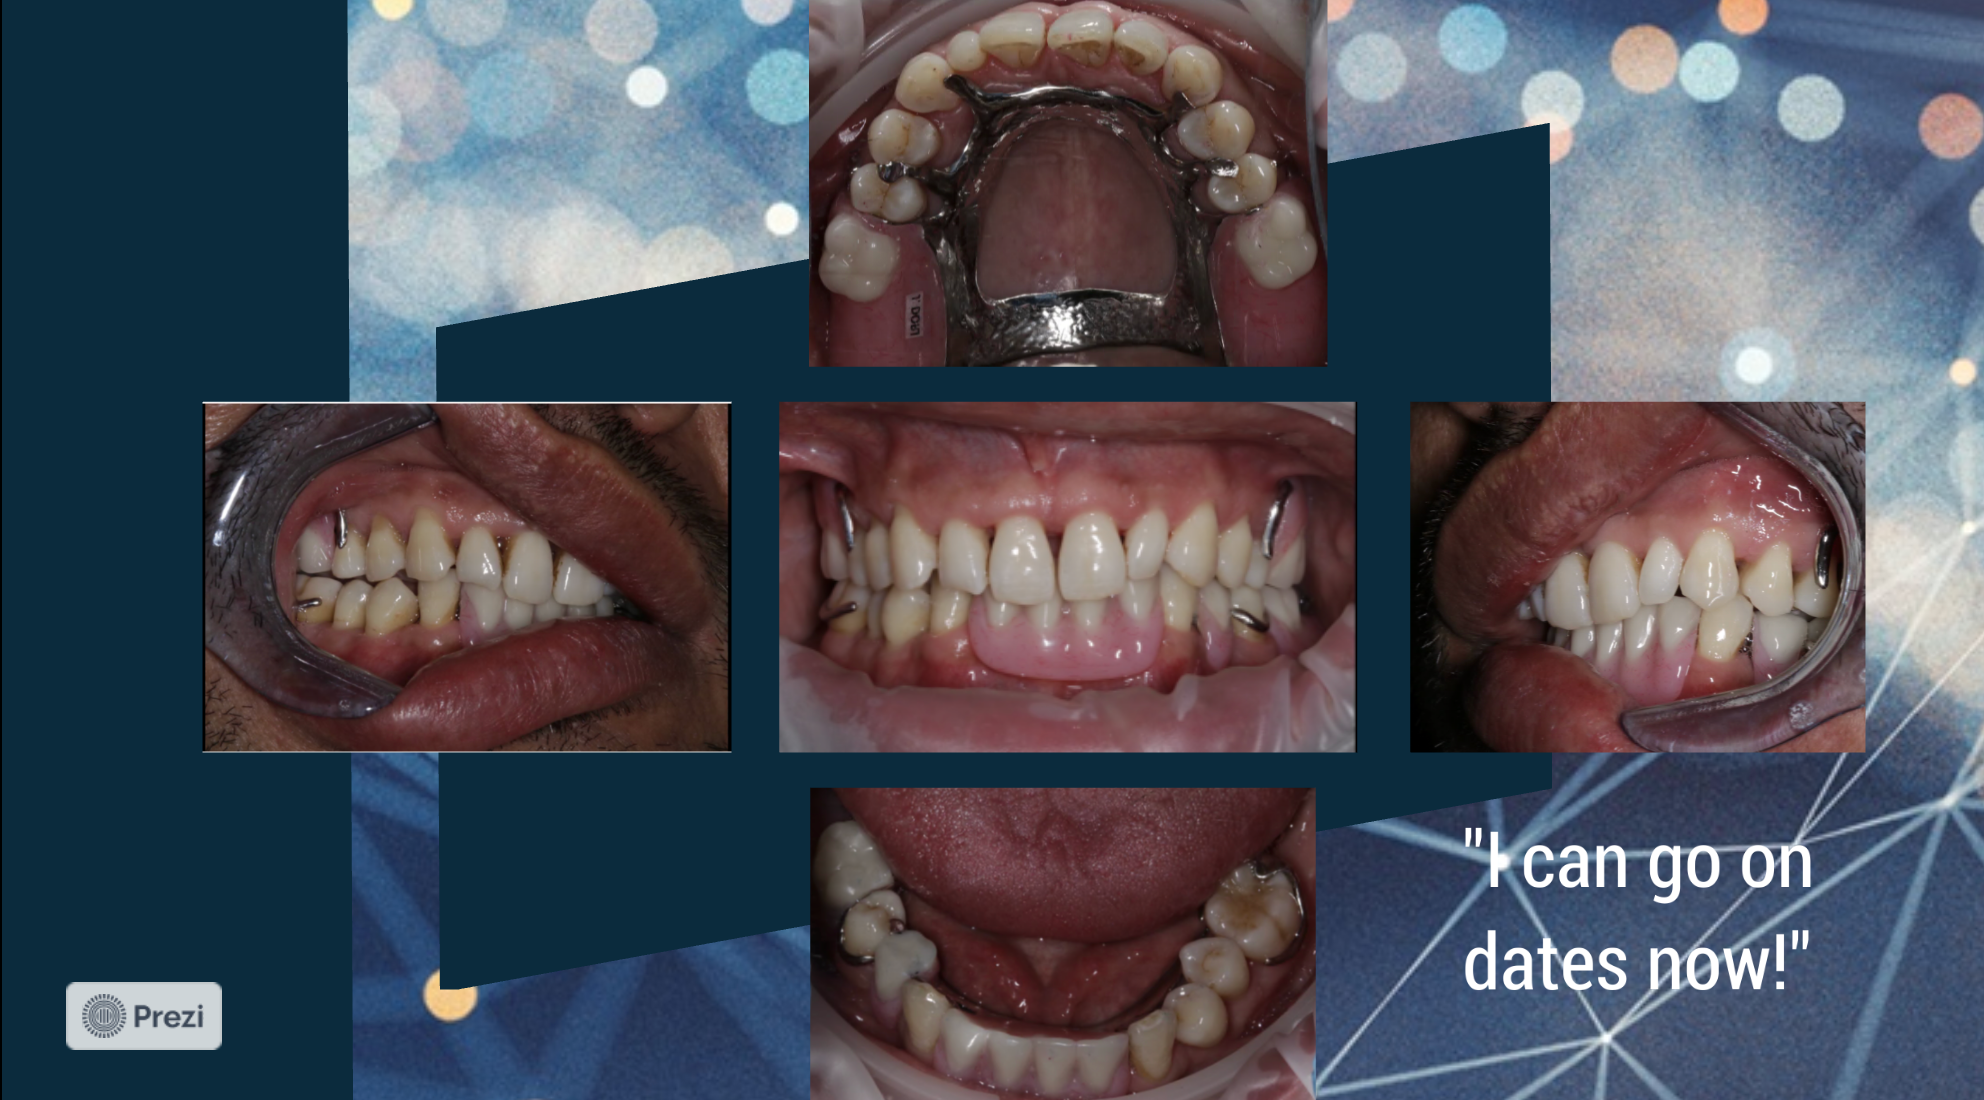 Treating a Patient Who Has Never Been to the Dentist Before With Removable Partial Dentures